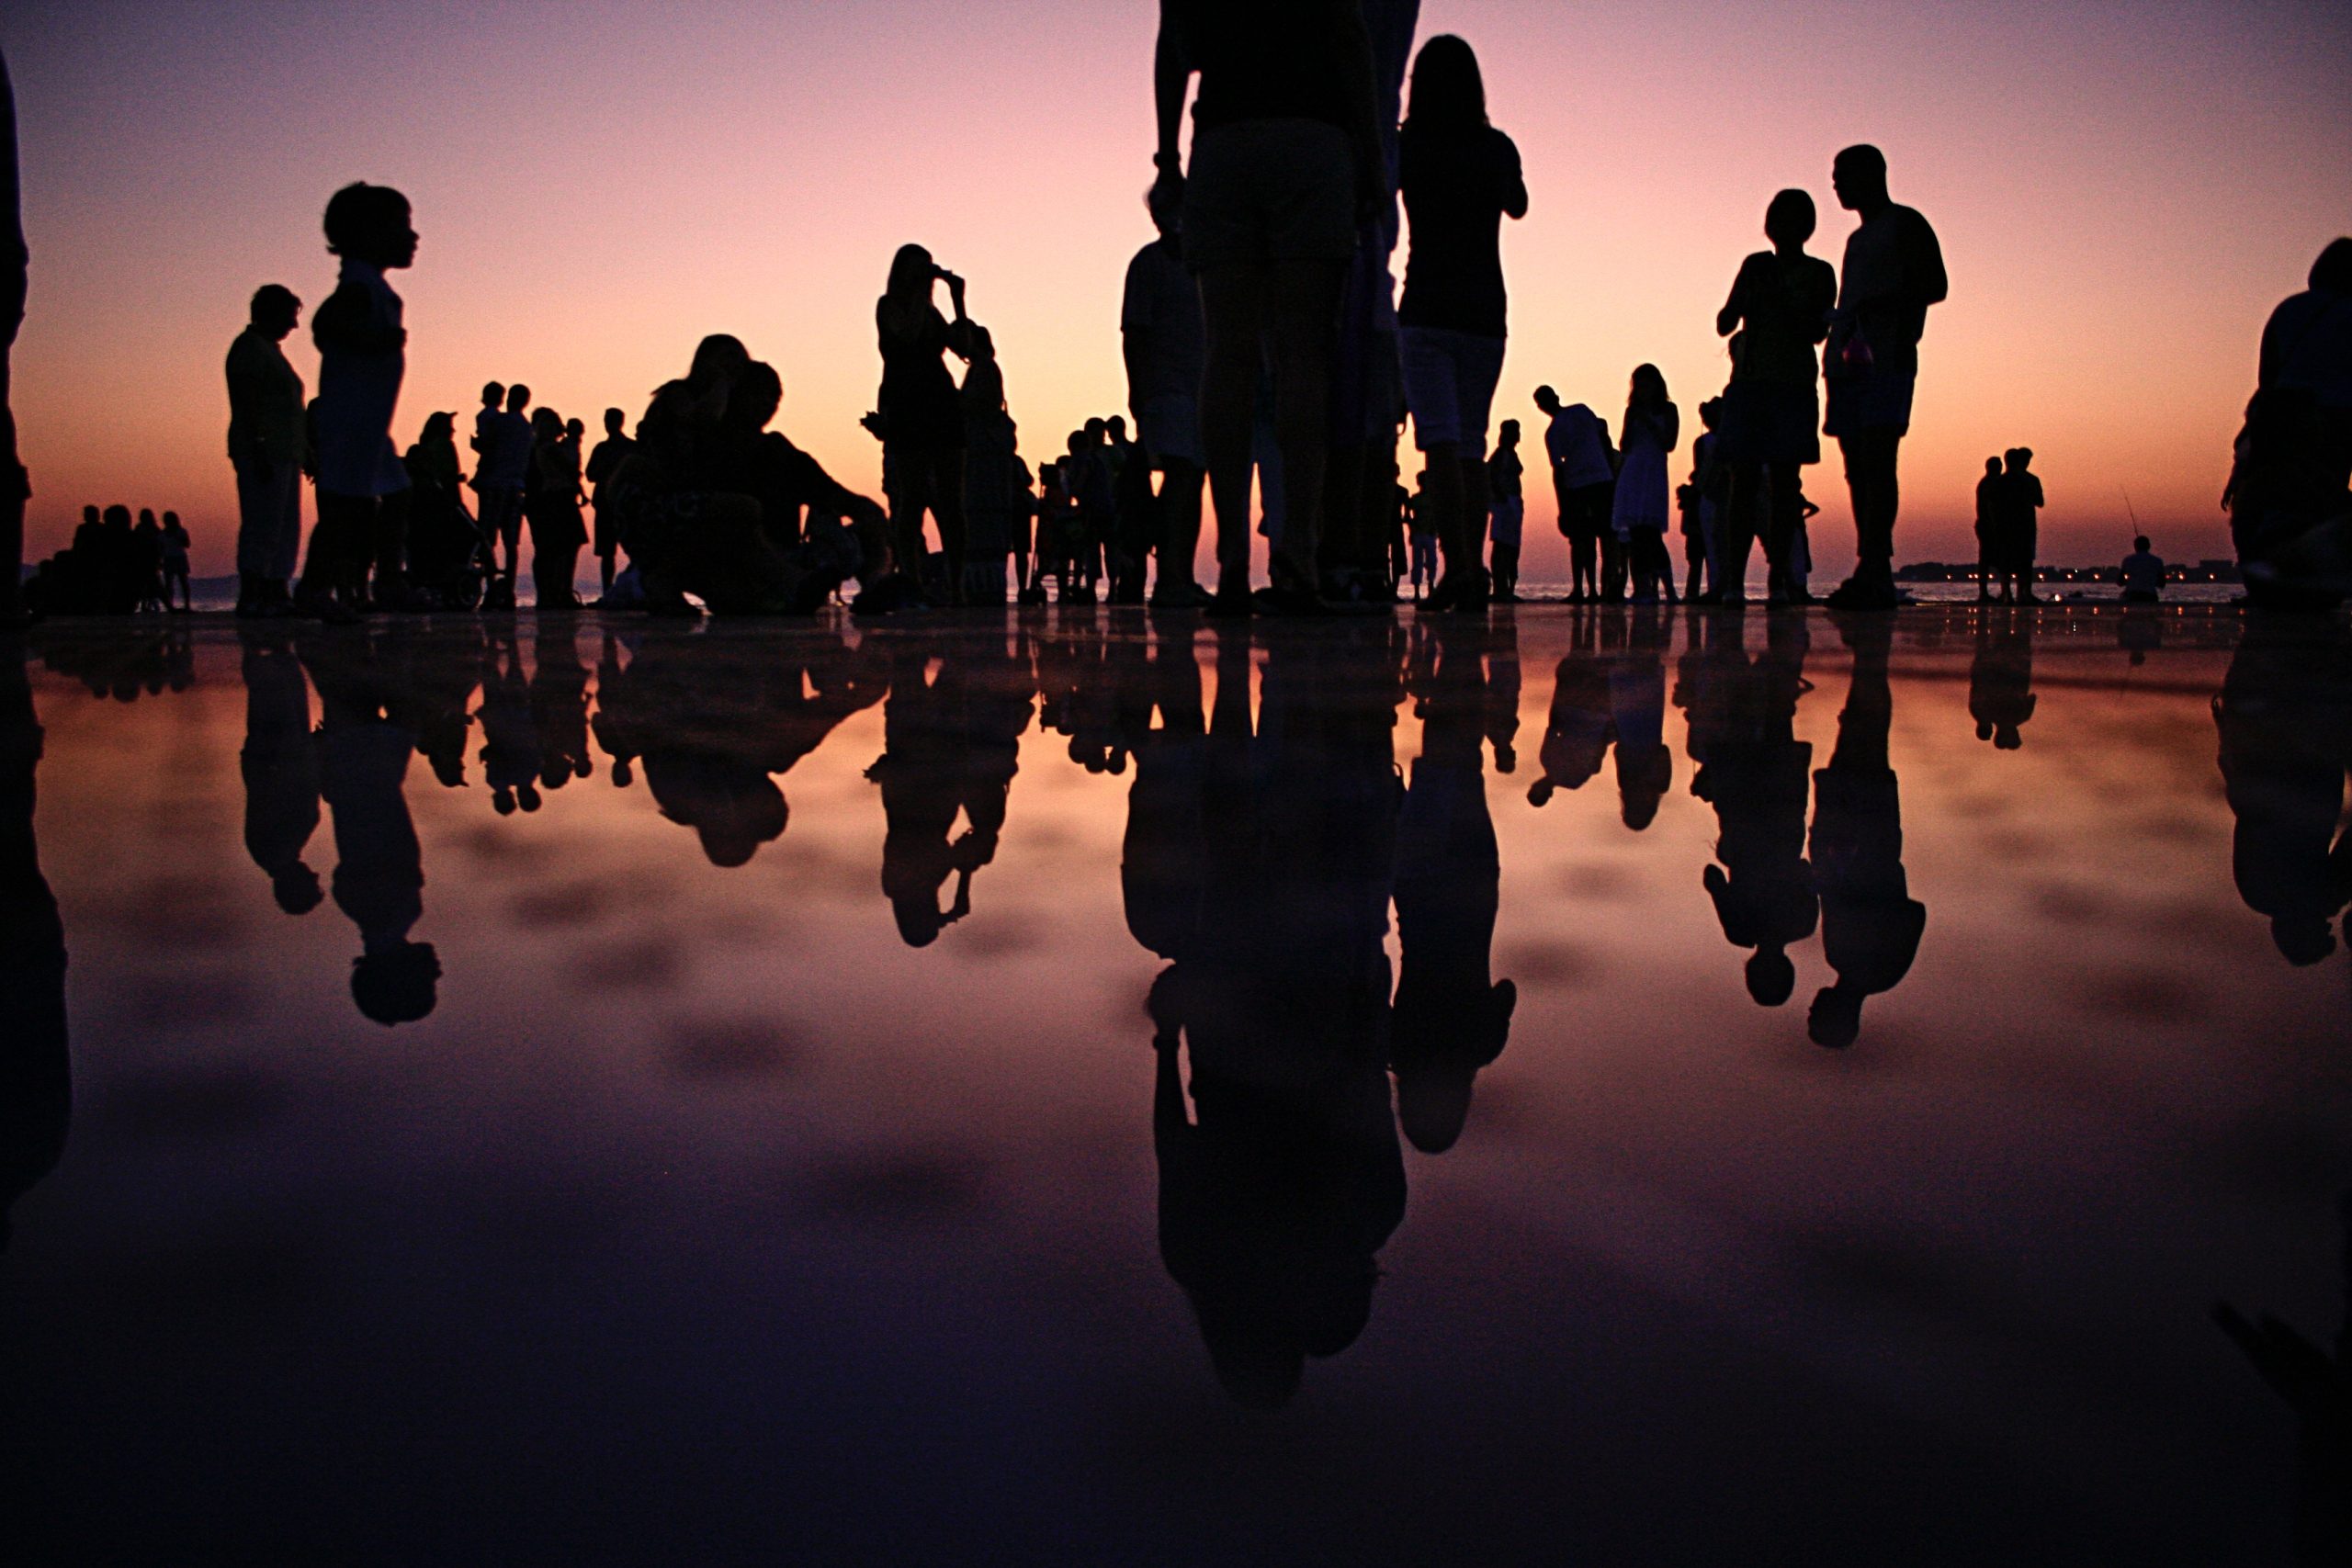 Silhouette of people standing on mirror during golden hour.